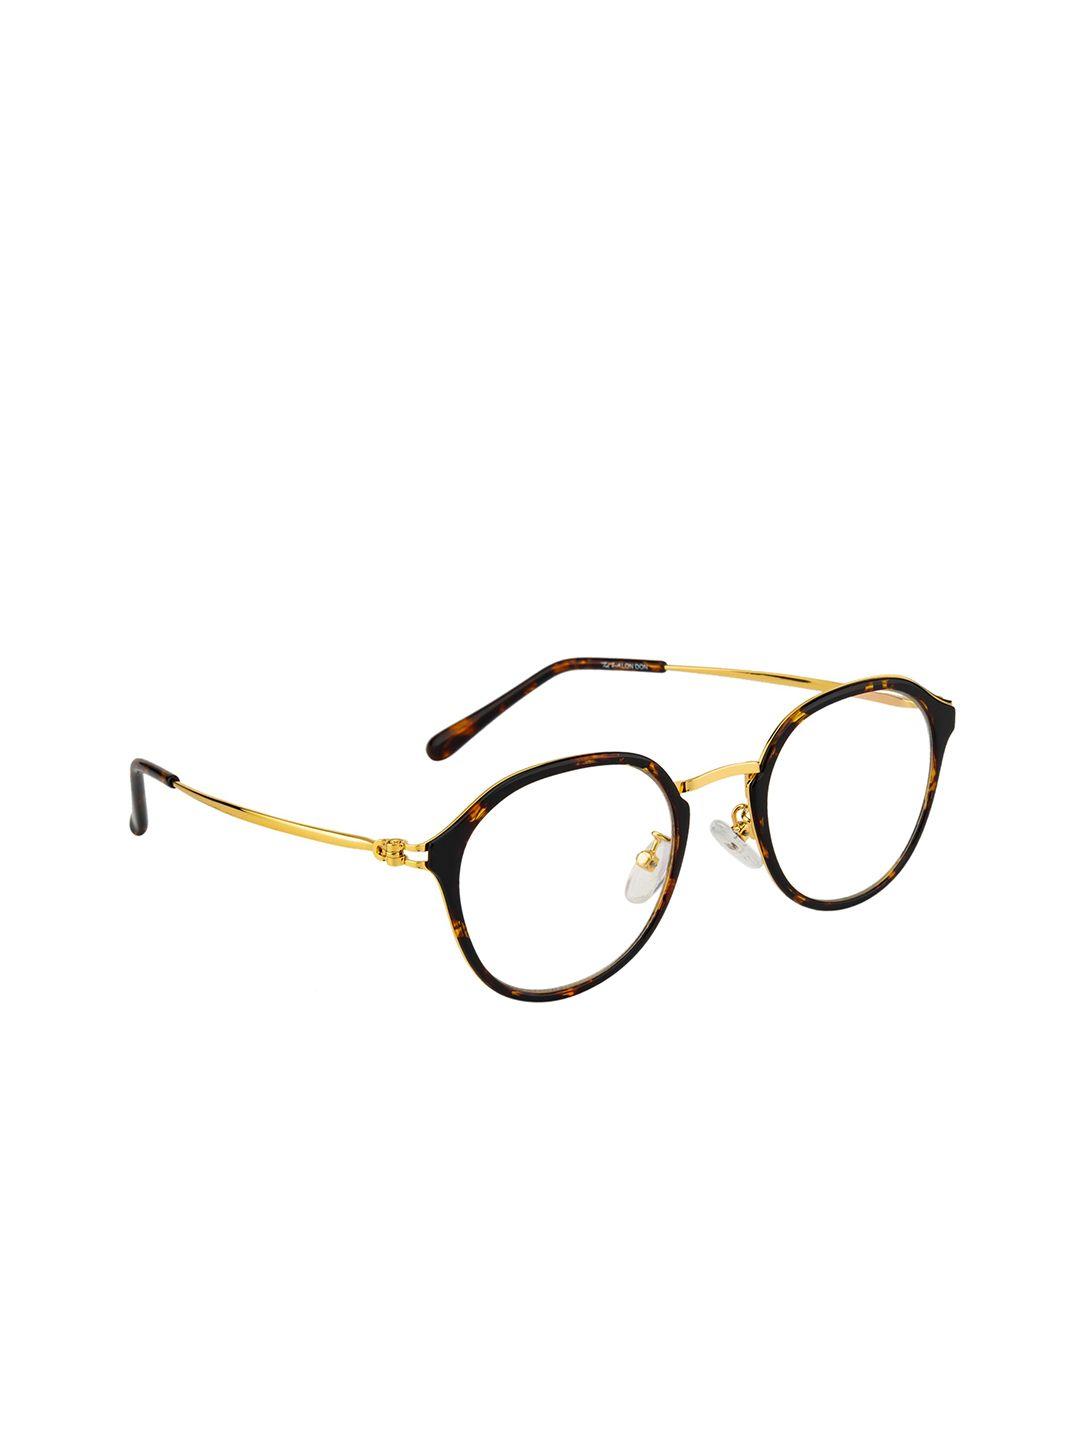 ted smith unisex brown & gold-toned full rim round frames